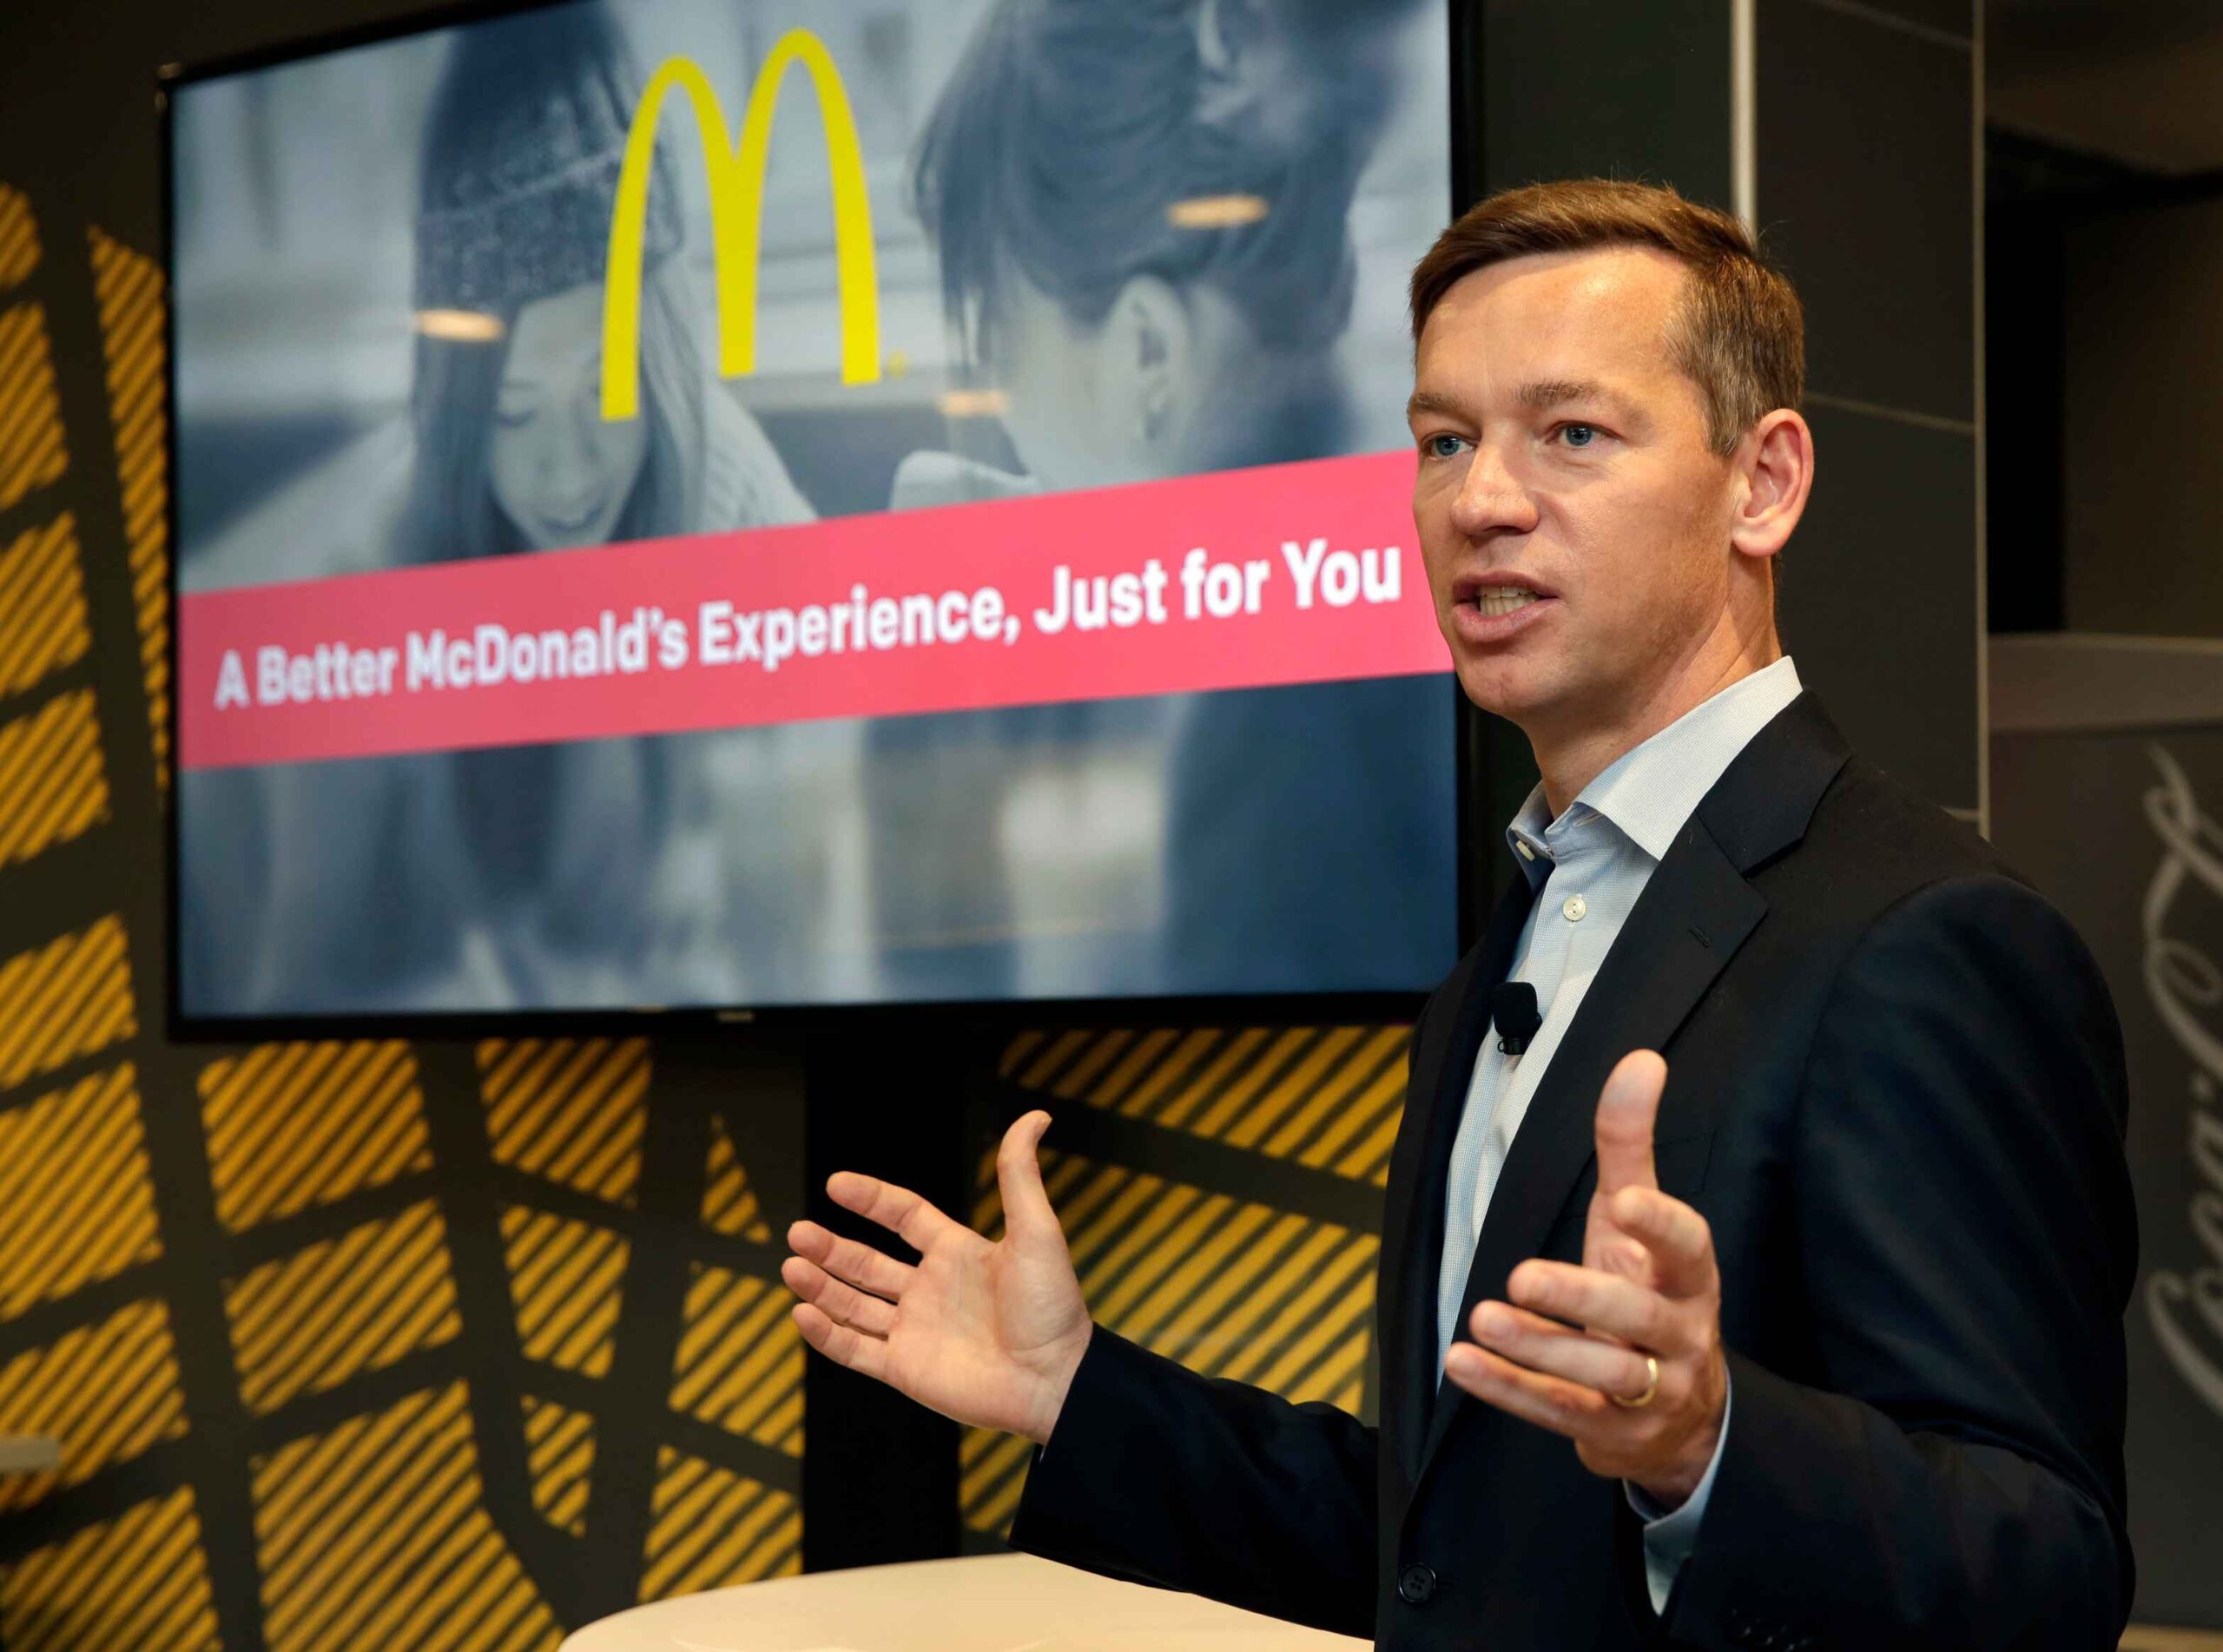 McDonald’s CEO Chris Kempczinski signaled that the company will refocus on “affordability” this year amid customer pushback against jacked-up menu prices.